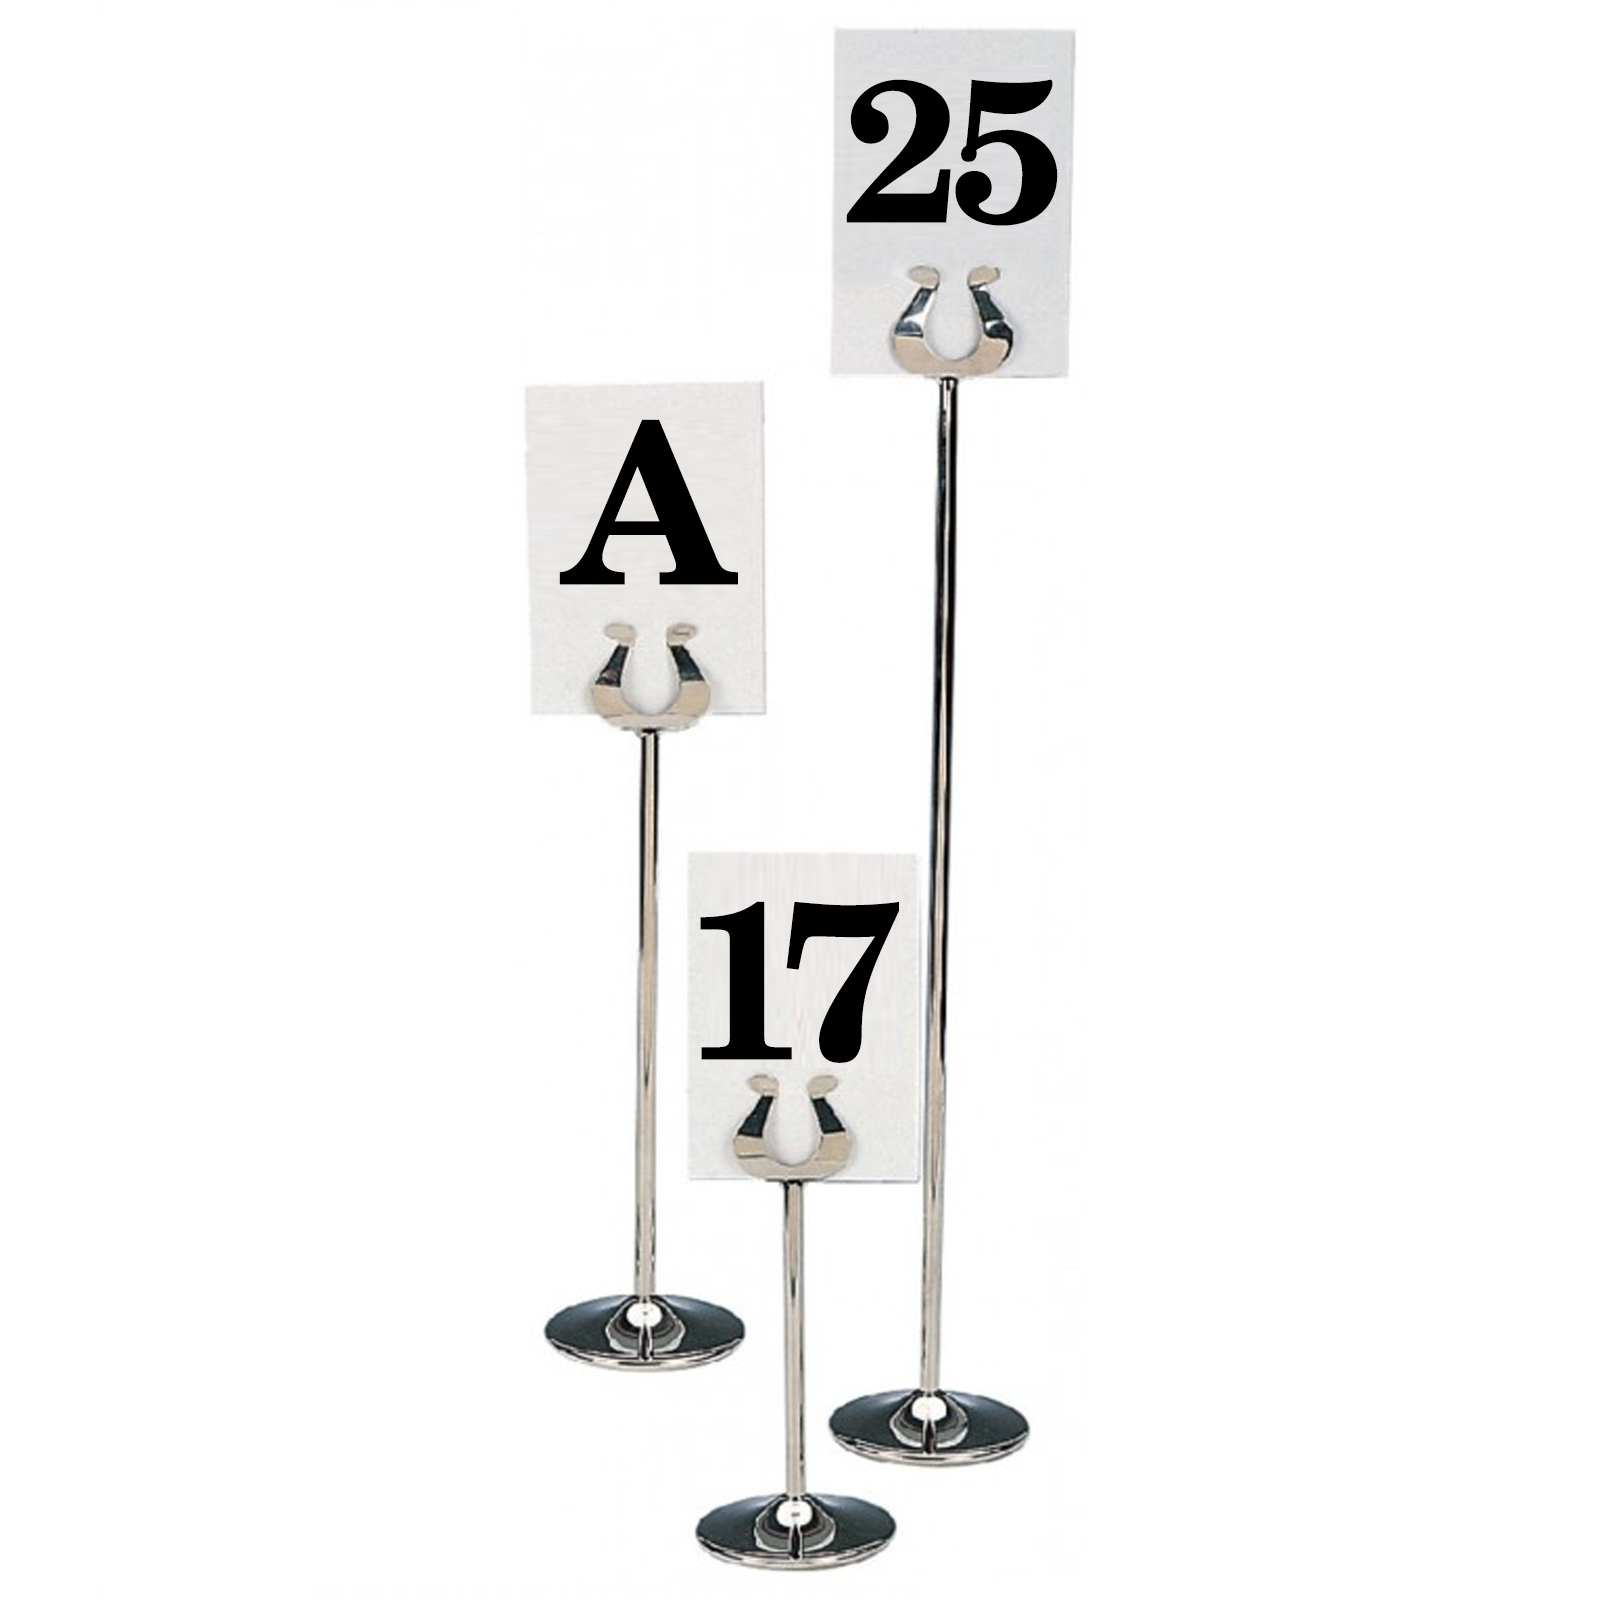 Replacement Table Stand Number Cards and Letter Cards